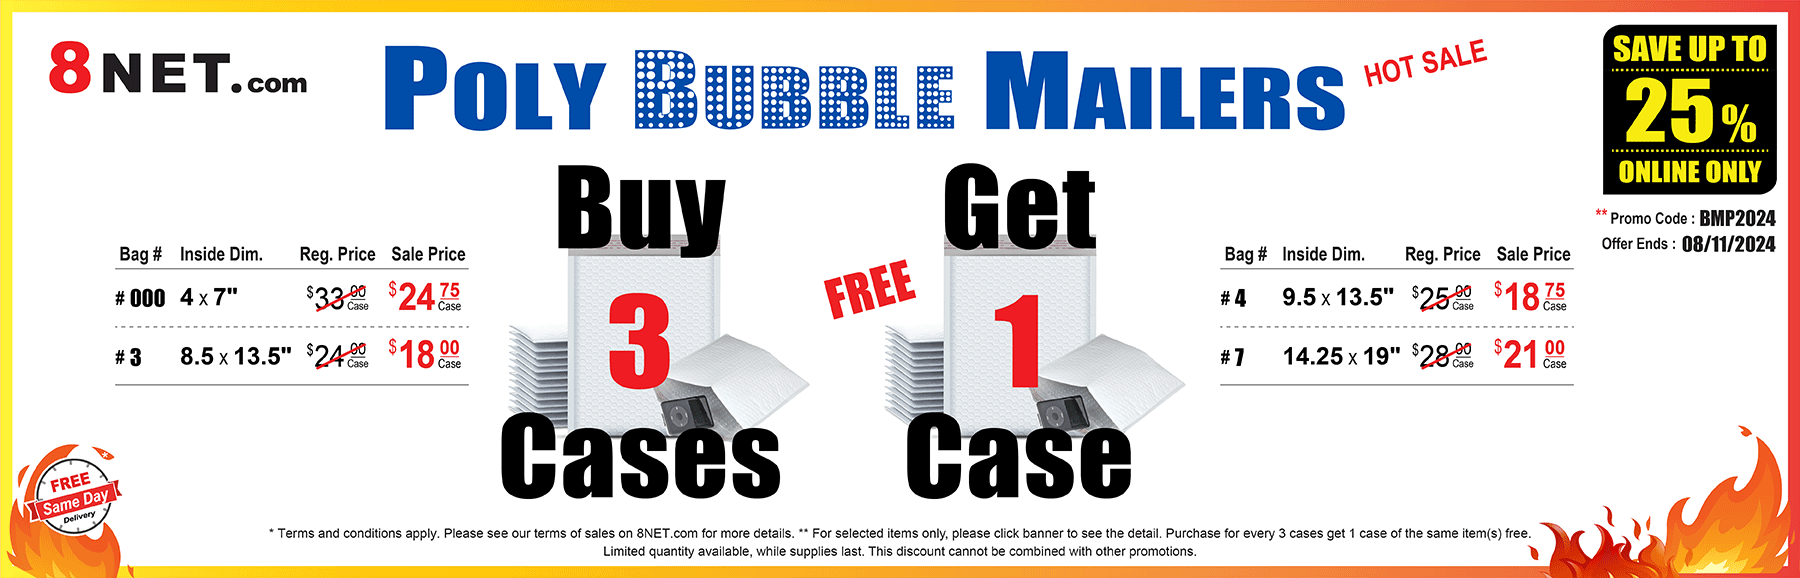 https://www.8net.com/shipping-supply/special-shipping-supplies-sale/poly-bubble-mailer-sale.html